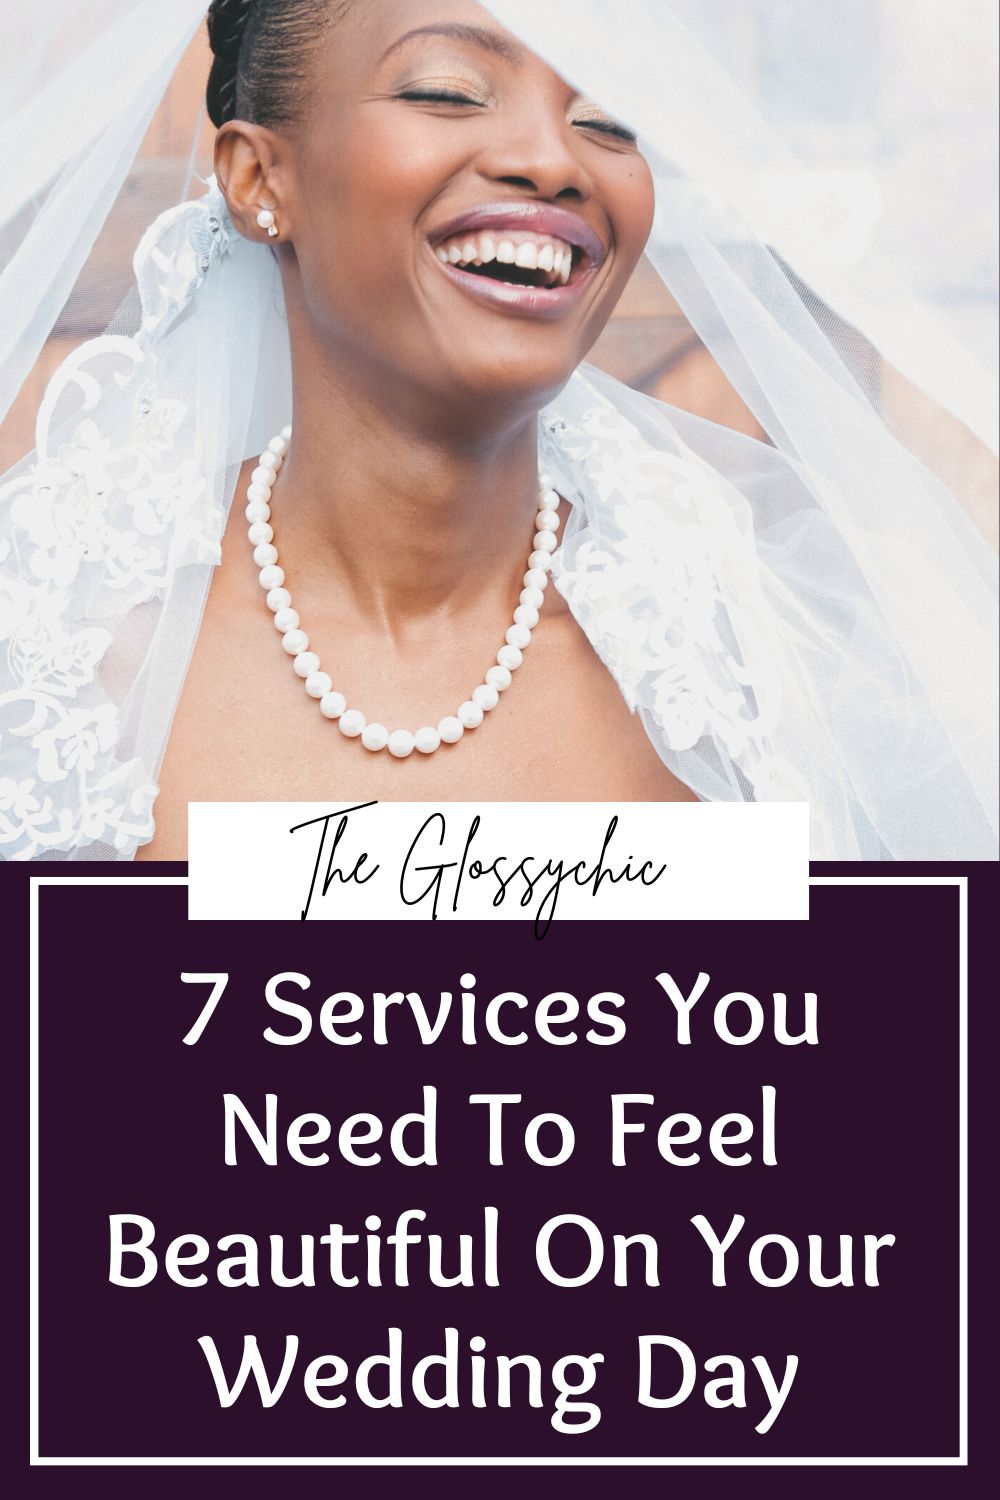 Bride Preparation: 7 Services You Need To Feel Beautiful On Your Wedding Day